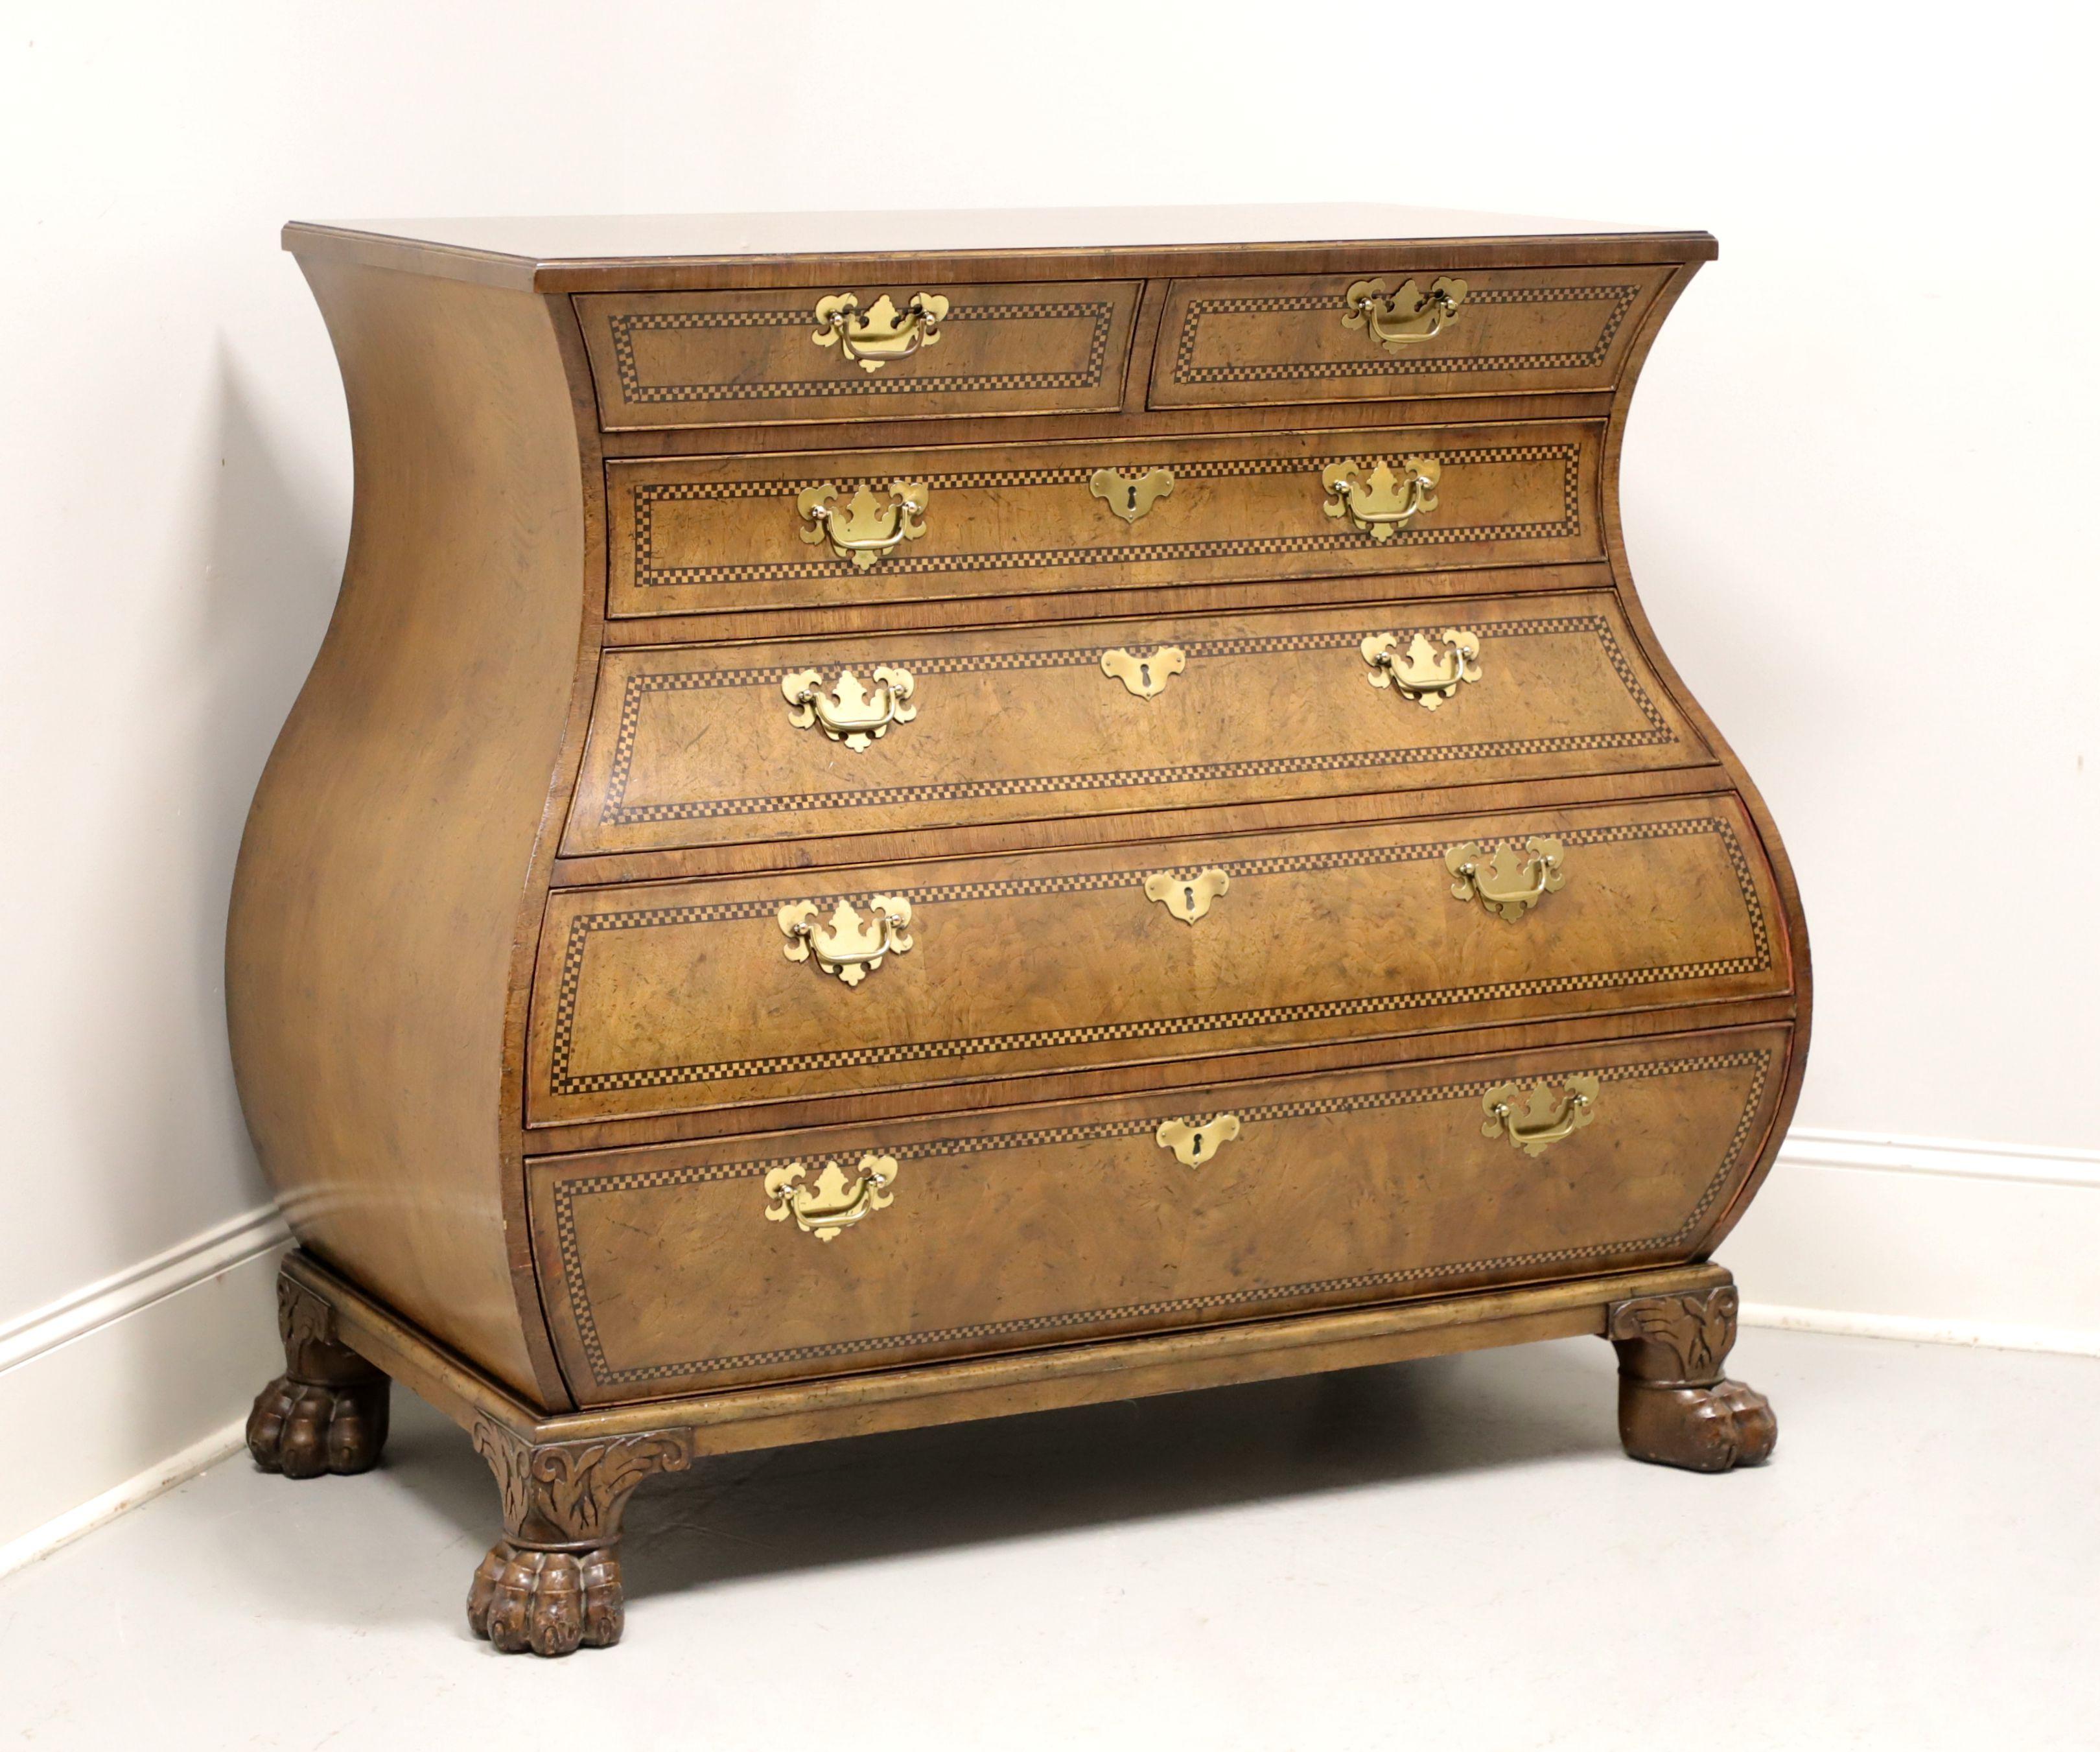 A George II style bombe commode chest by Baker Furniture, from their Stately Homes Collection. Walnut with slightly distressed finish, inlays, moulded rectangular top inlaid with cross-banded borders & chequer pattern bands, graduated bombe shape,